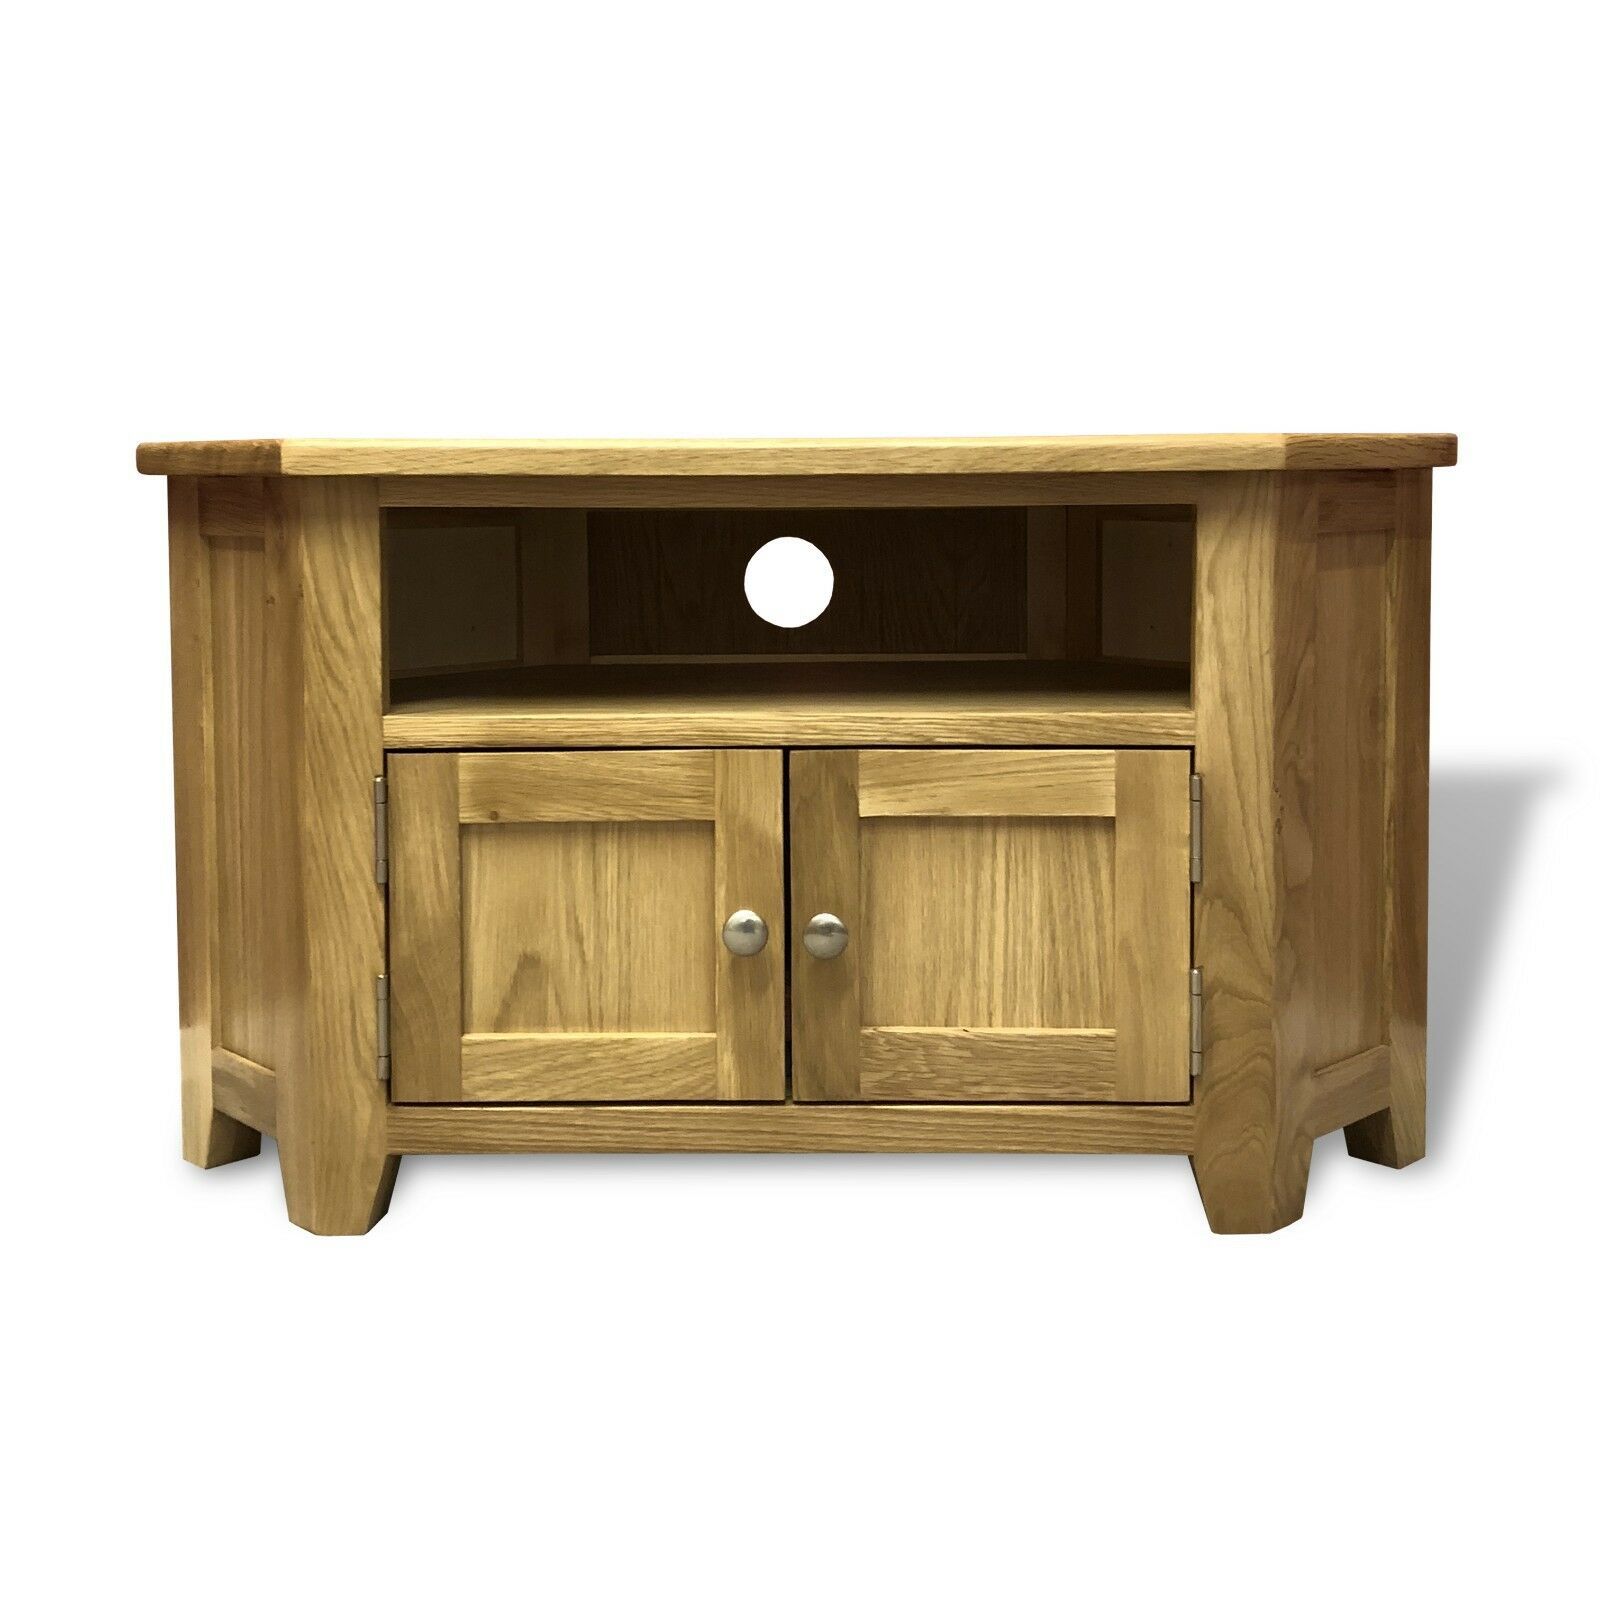 Oak Corner Tv Stand With Doors / Solid Wood Television For Tribeca Oak Tv Media Stand (View 1 of 15)